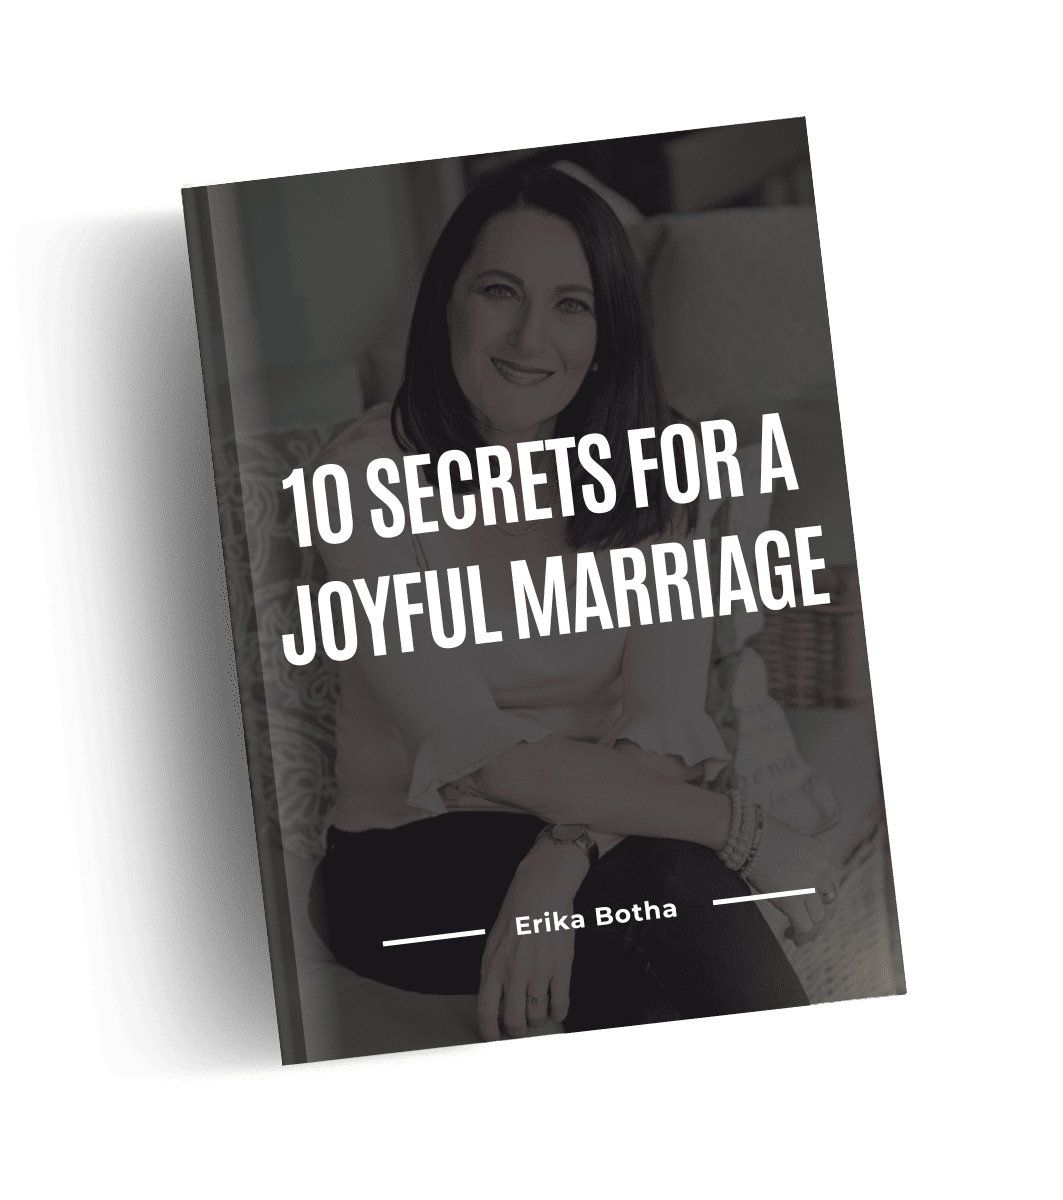 marriage counseling ebook about 10 secrets to a joyful marriage